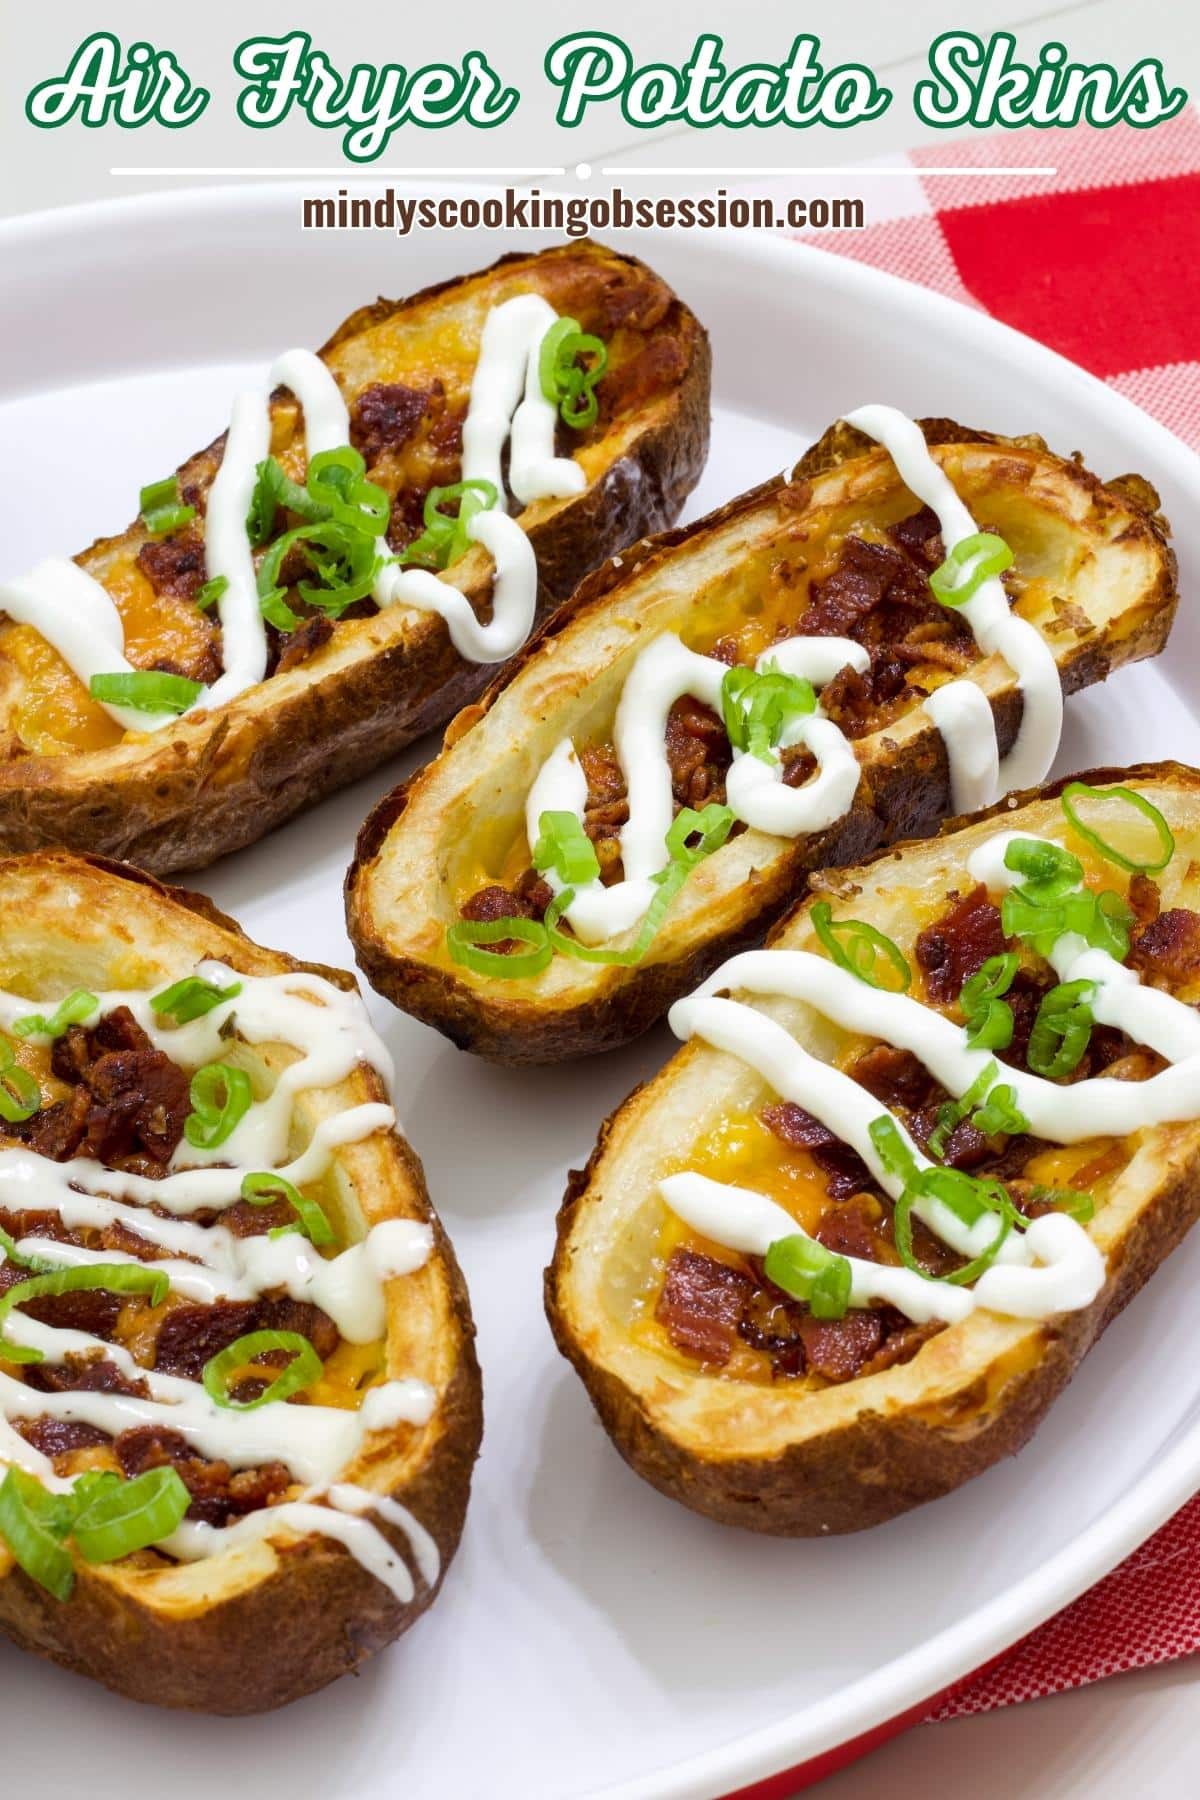 Homemade Loaded Potato Skins in the Air Fryer Recipe requires only 5 ingredients to make a this classic quick, easy and delicious appetizer. via @mindyscookingobsession